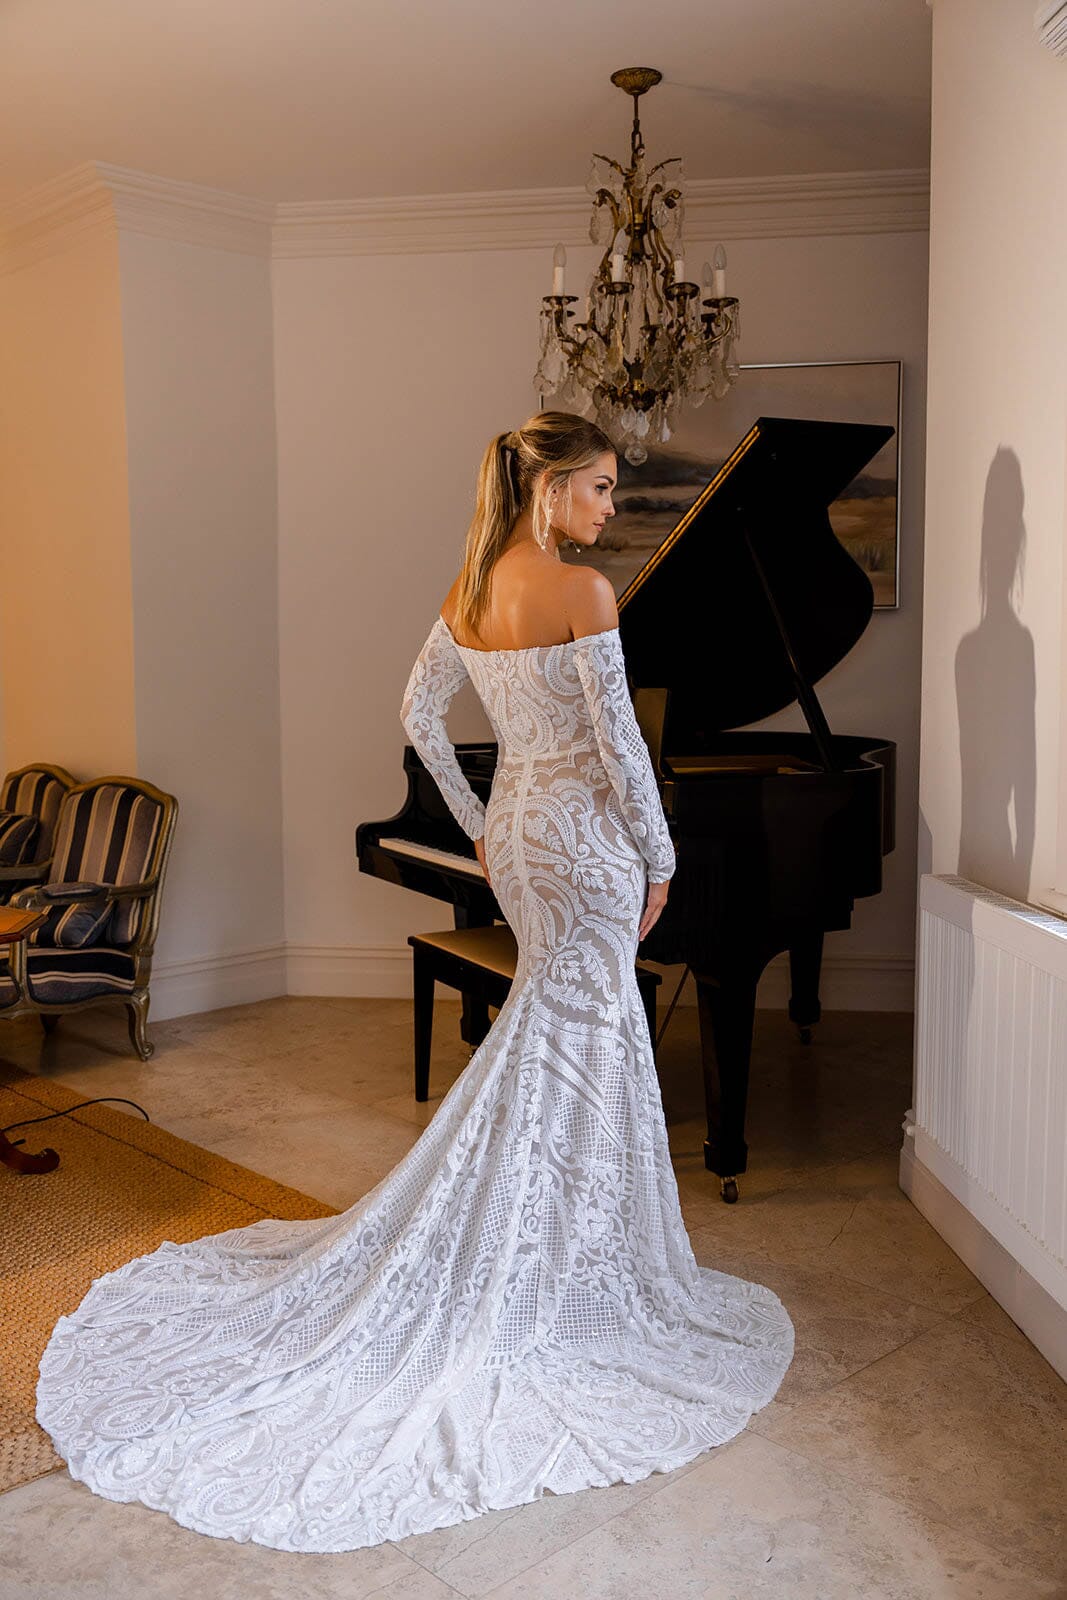 Back Image showcasing moderately long train of Nude Illusion Fitted Wedding Dress with Off-Shoulder Long Sleeves in White Pattern Sequin and Nude Underlay